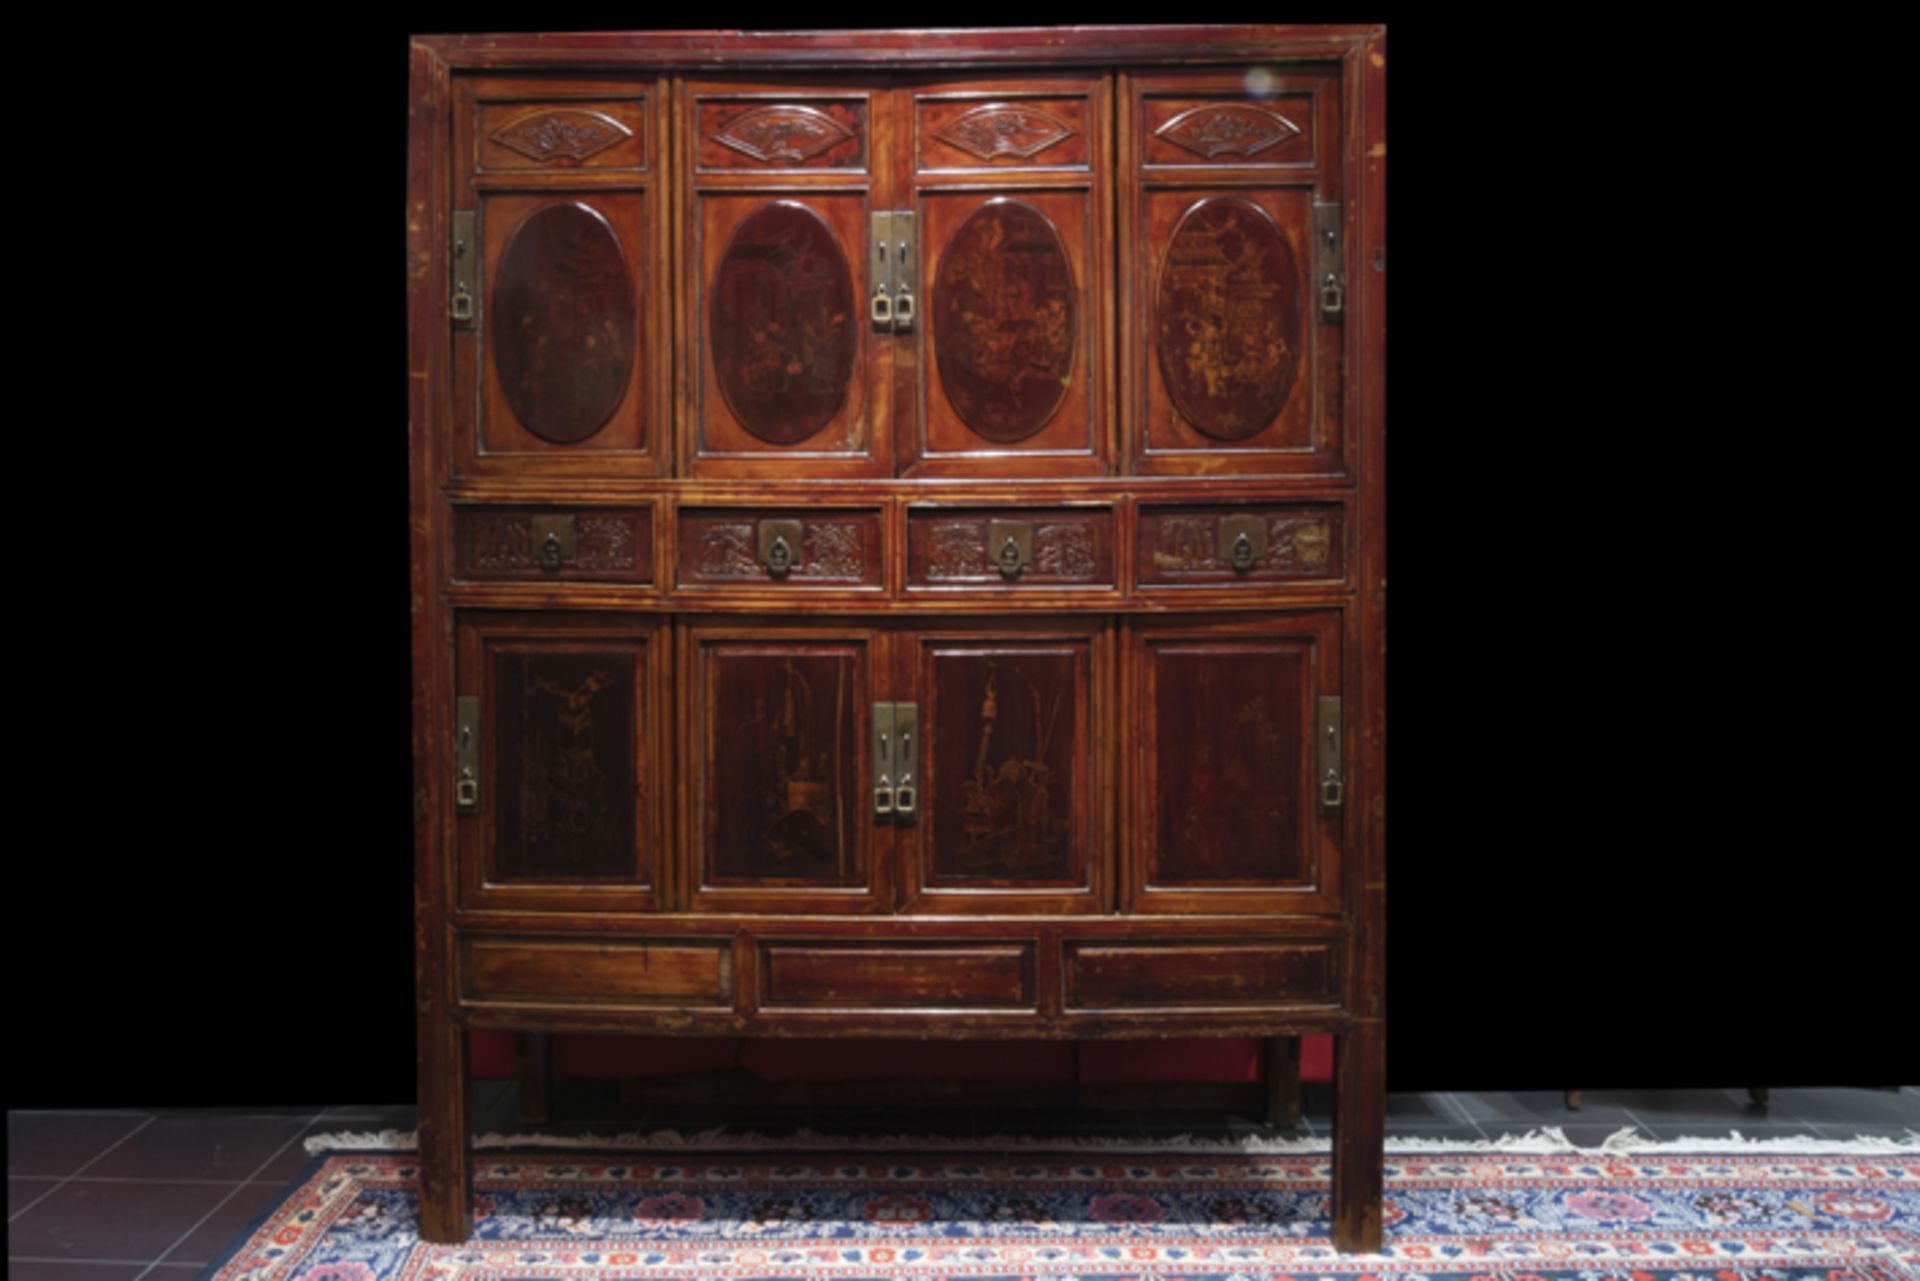 18th/19th Cent. Chinese Qing dynasty cabinet with four drawers and with eight doors, each with